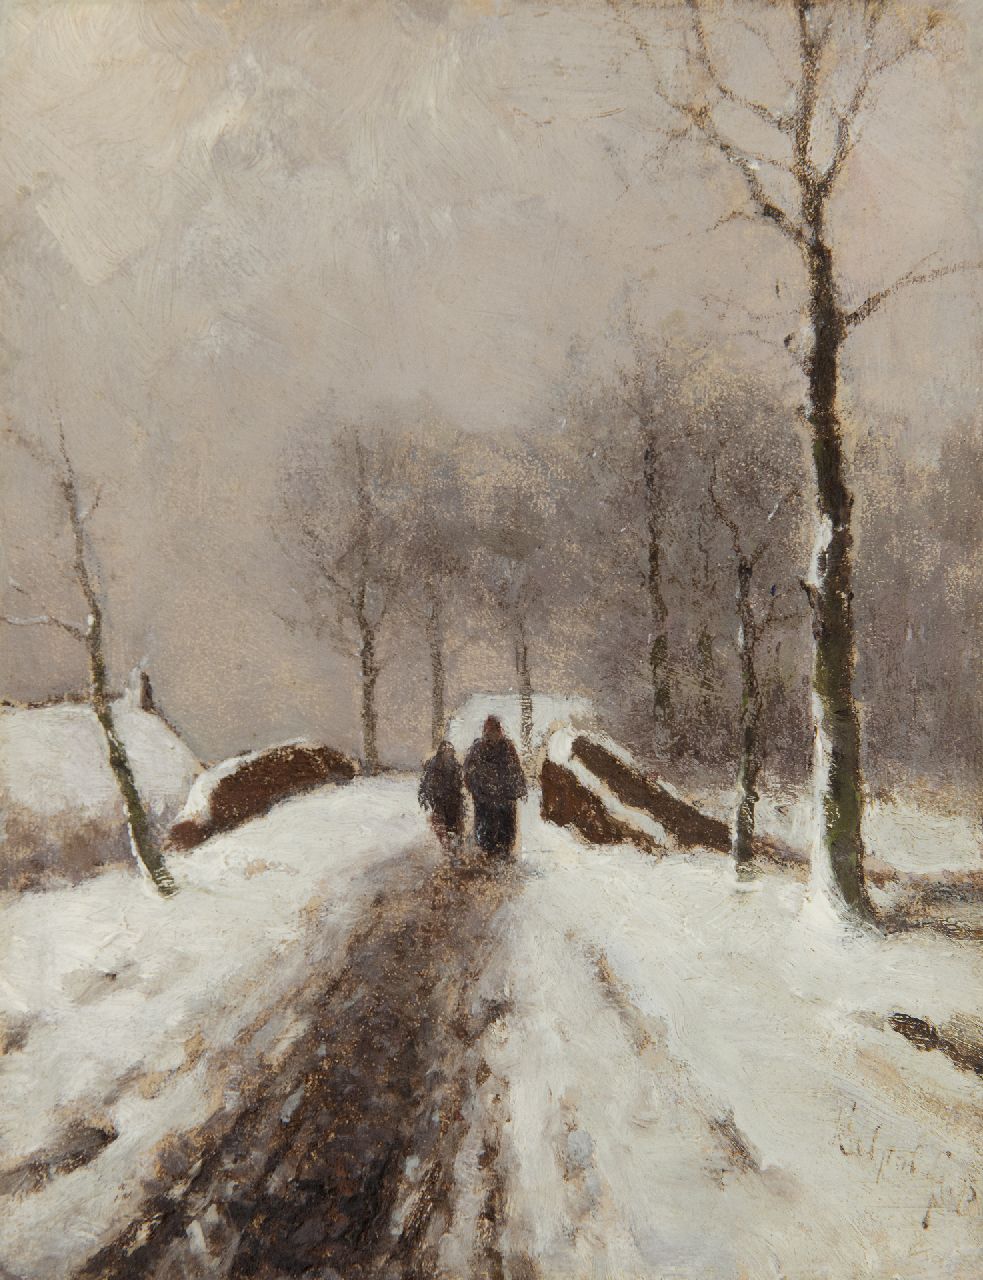 Apol L.F.H.  | Lodewijk Franciscus Hendrik 'Louis' Apol, Figures on a snowy path, oil on panel 19.0 x 14.9 cm, signed l.r. and dated '75